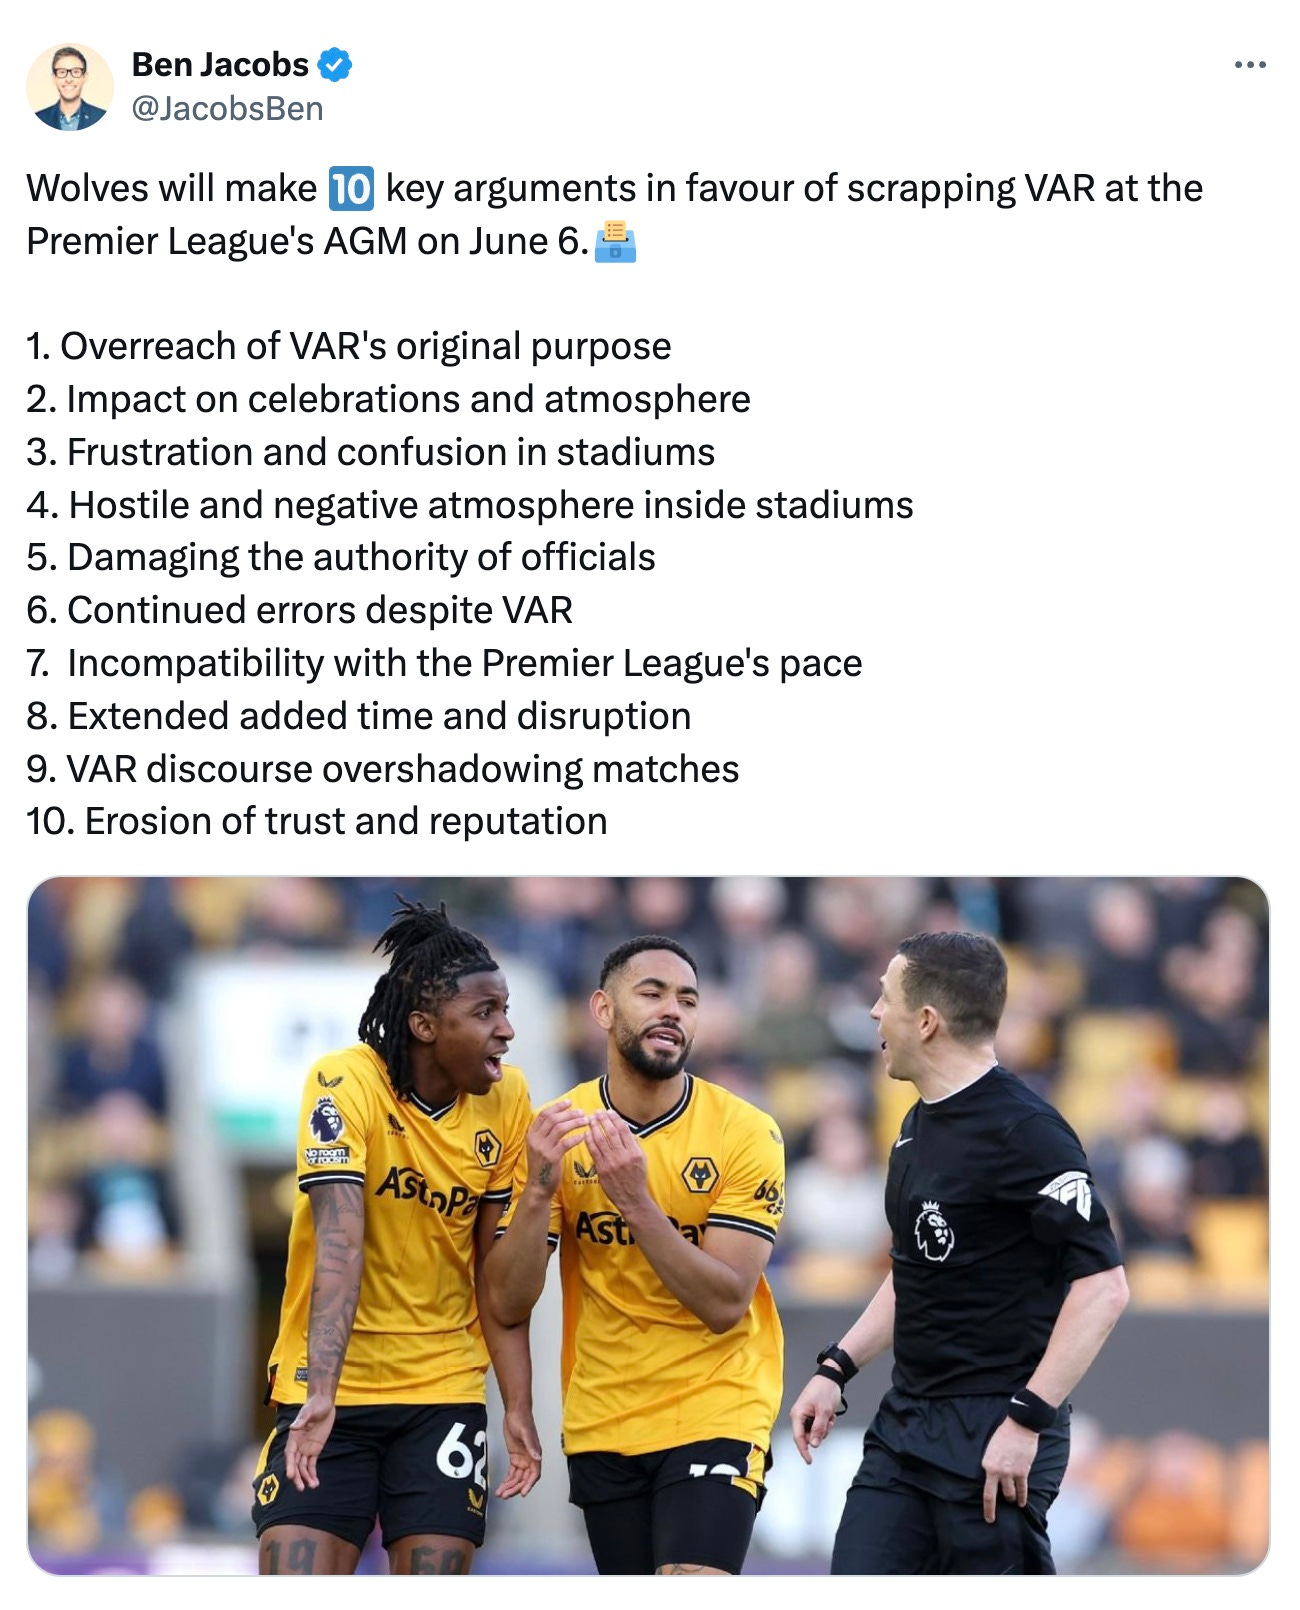 A tweet by Ben Jacobs about how Wolves will campaign to get VAR scrapped in the Premier League